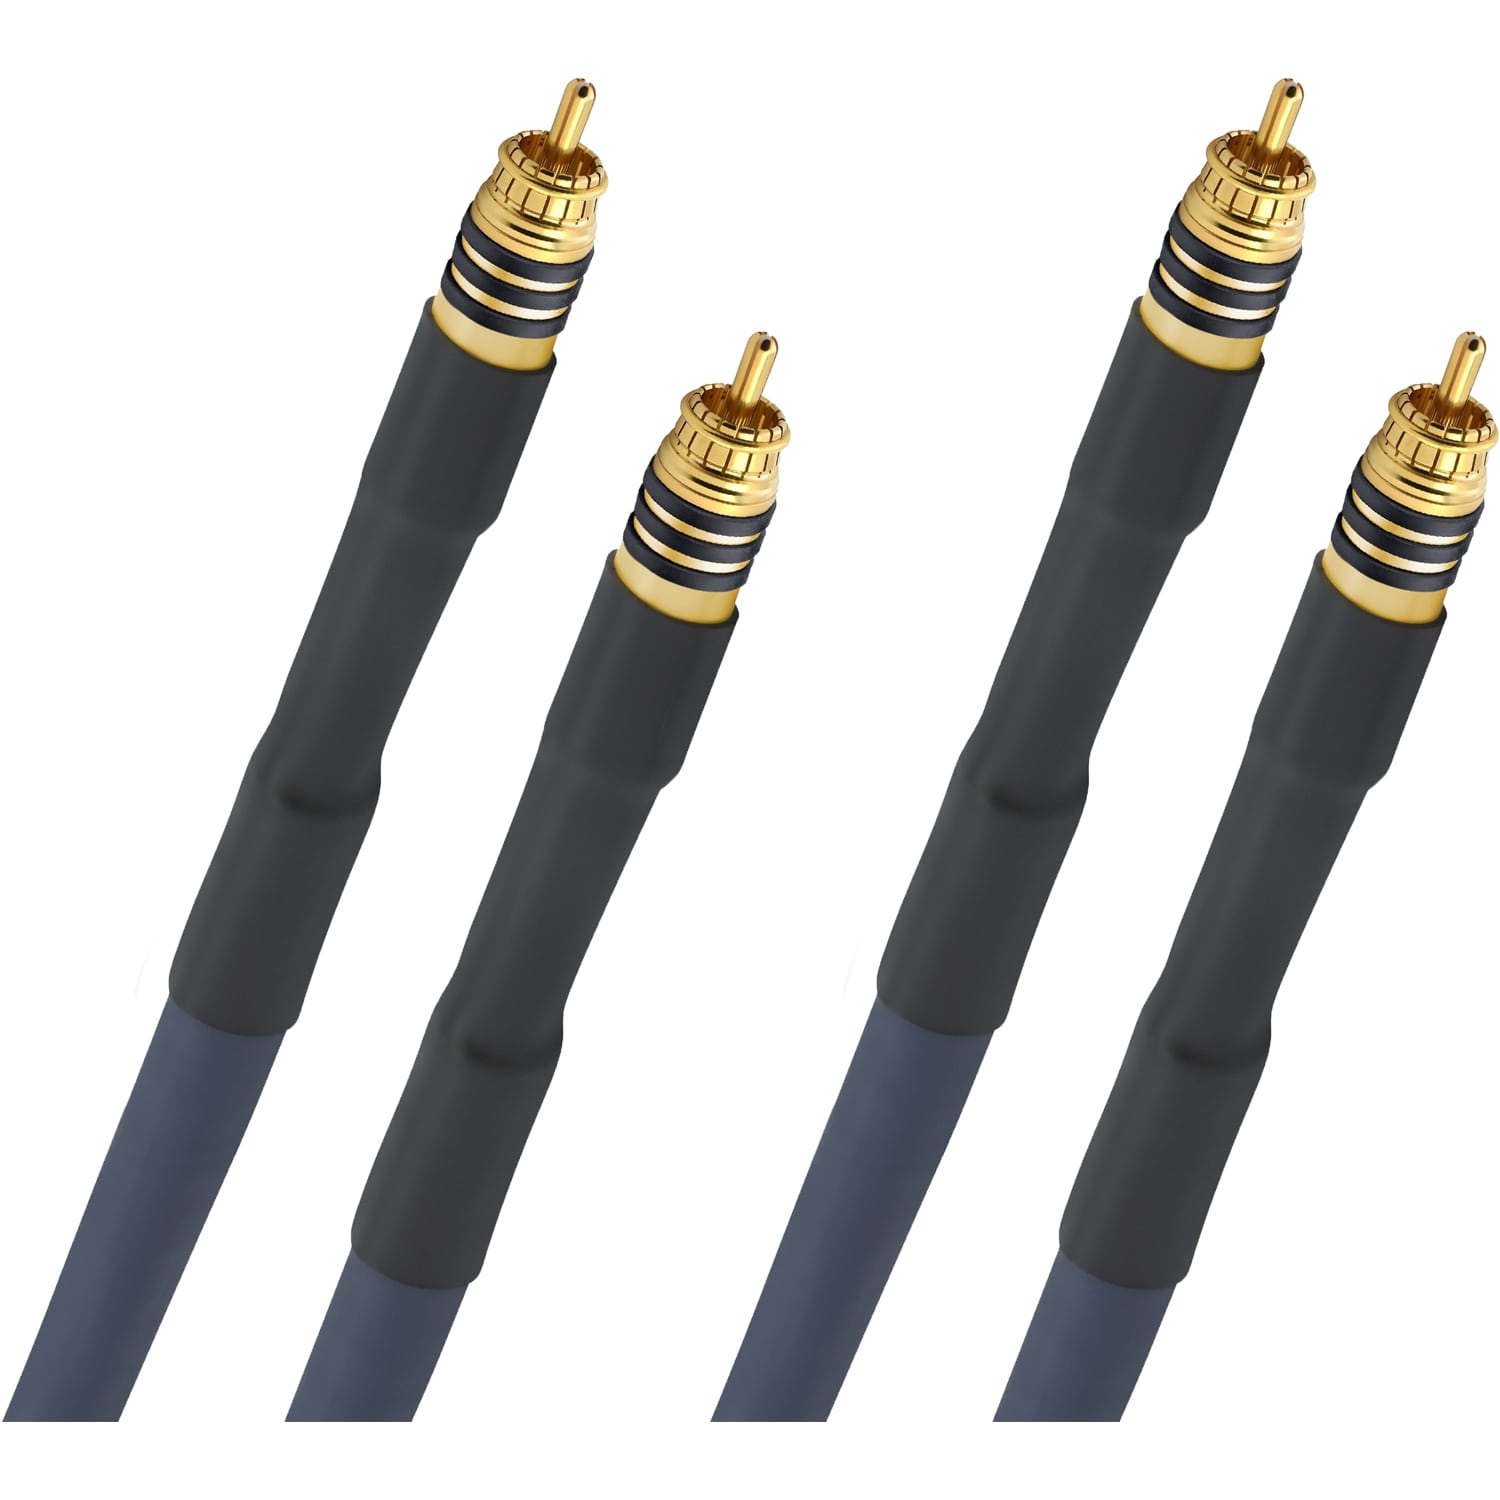 Кабели межблочные аудио Oehlbach STATE OF THE ART XXL Cable RCA, 2x2,00m, gold, D1C13116 кабели межблочные аудио oehlbach state of the art xxl cable rca 2x1 50m gold d1c13114